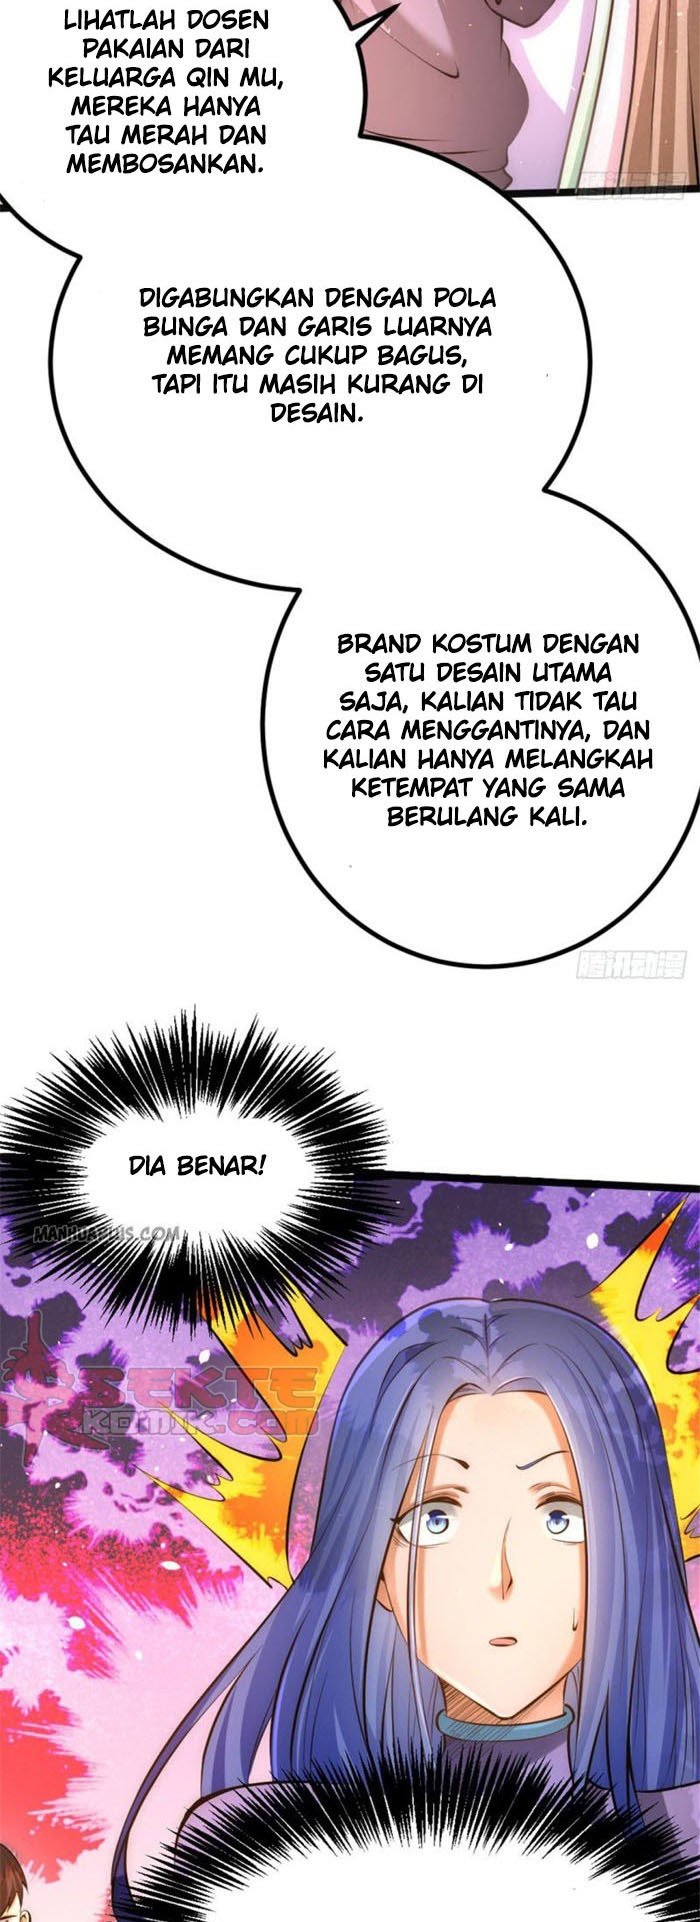 Almighty Master Chapter 58